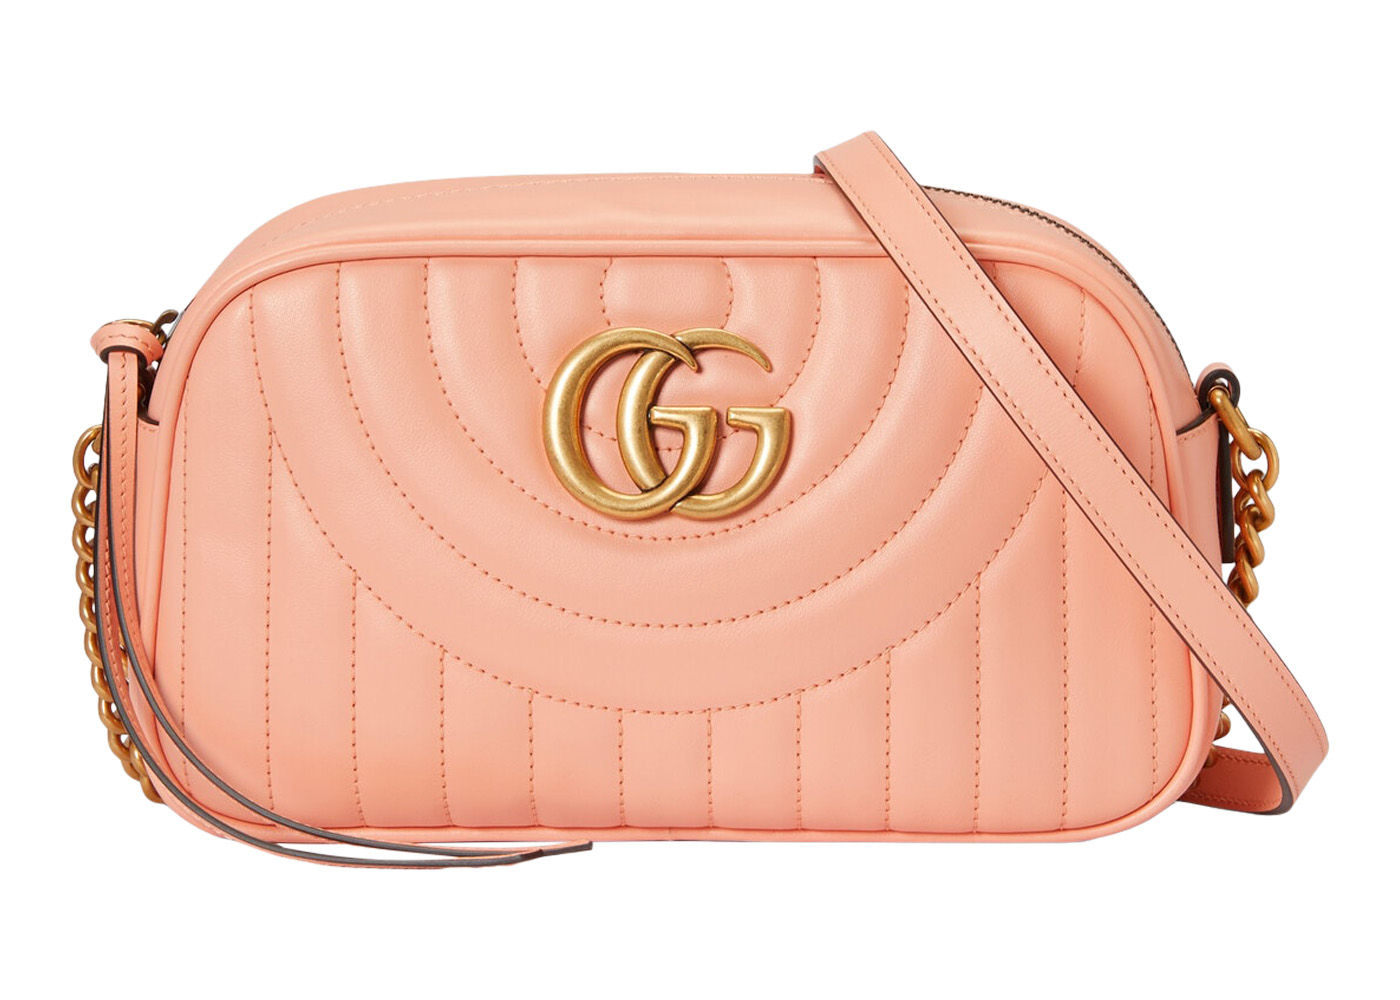 Gucci GG Marmont Shoulder Bag Peach in Leather with Antique Gold